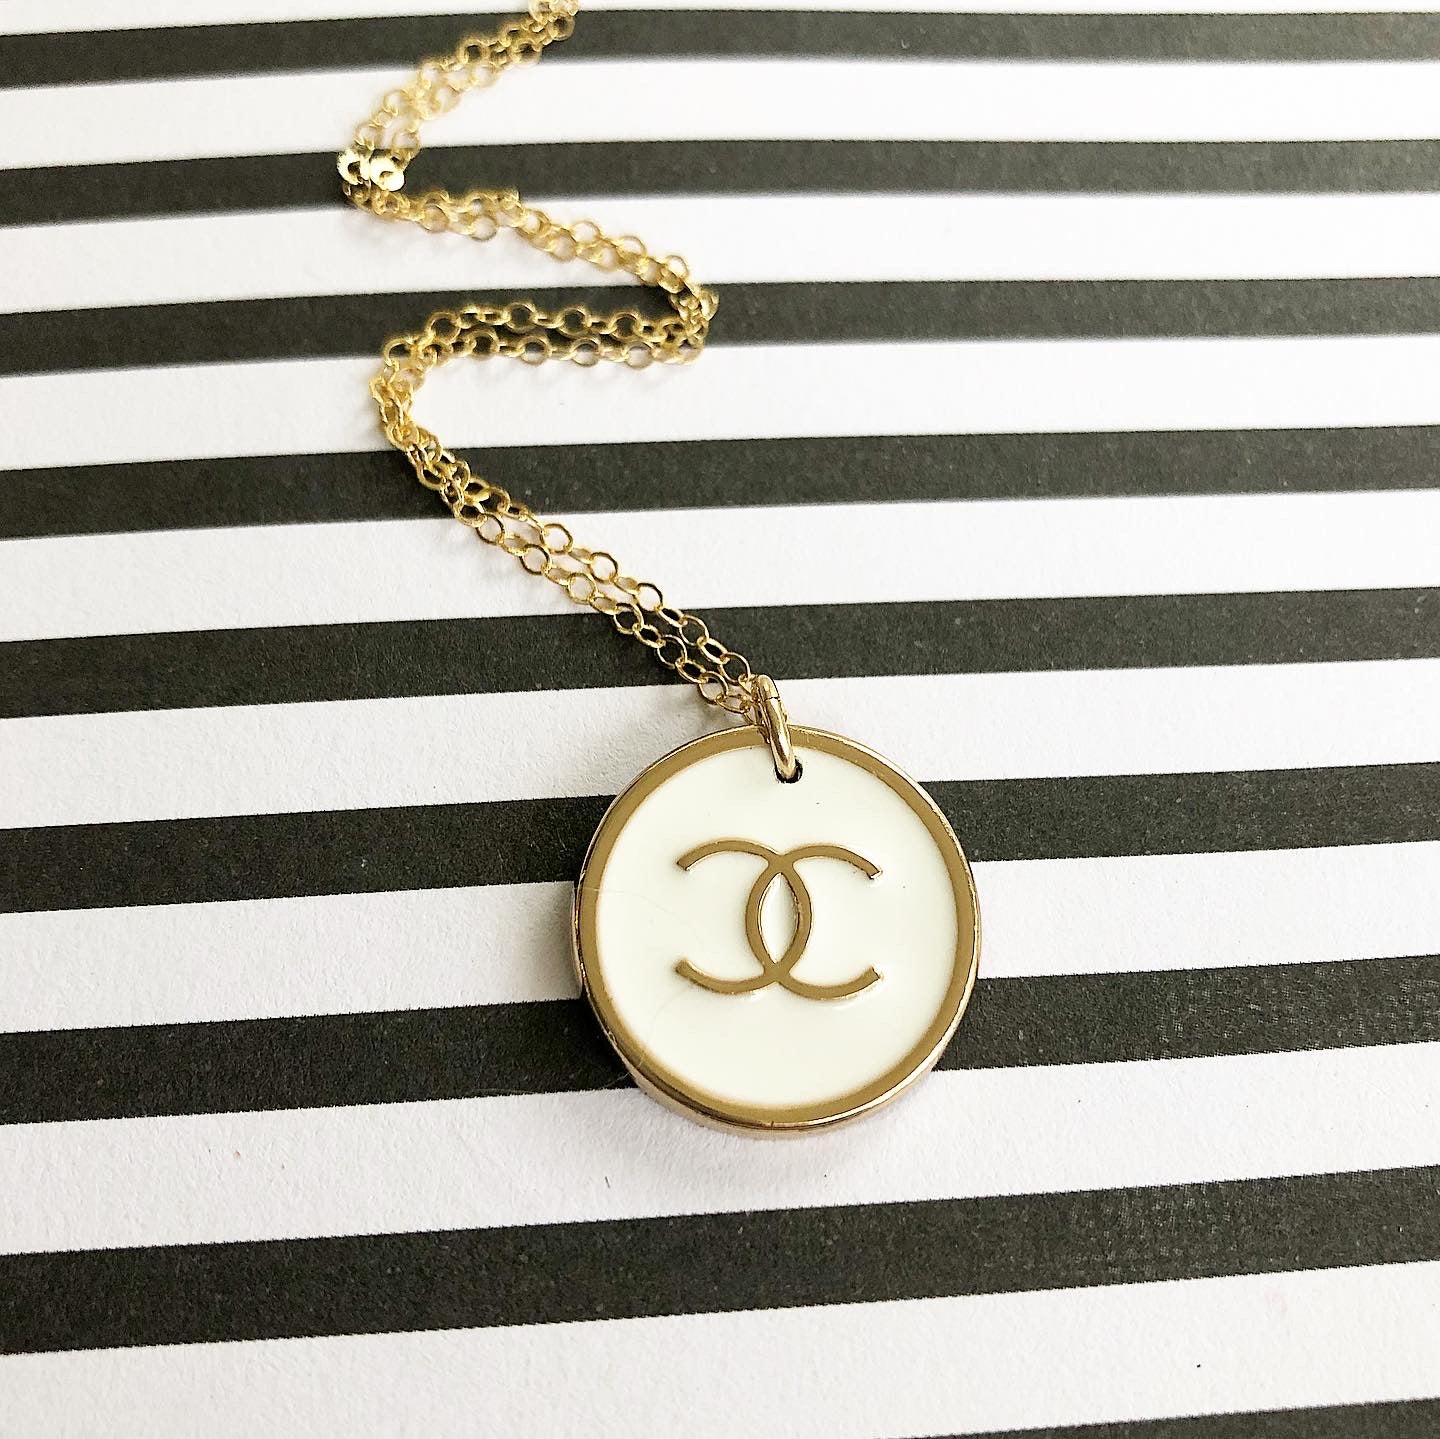 Gold and White Chanel Necklace